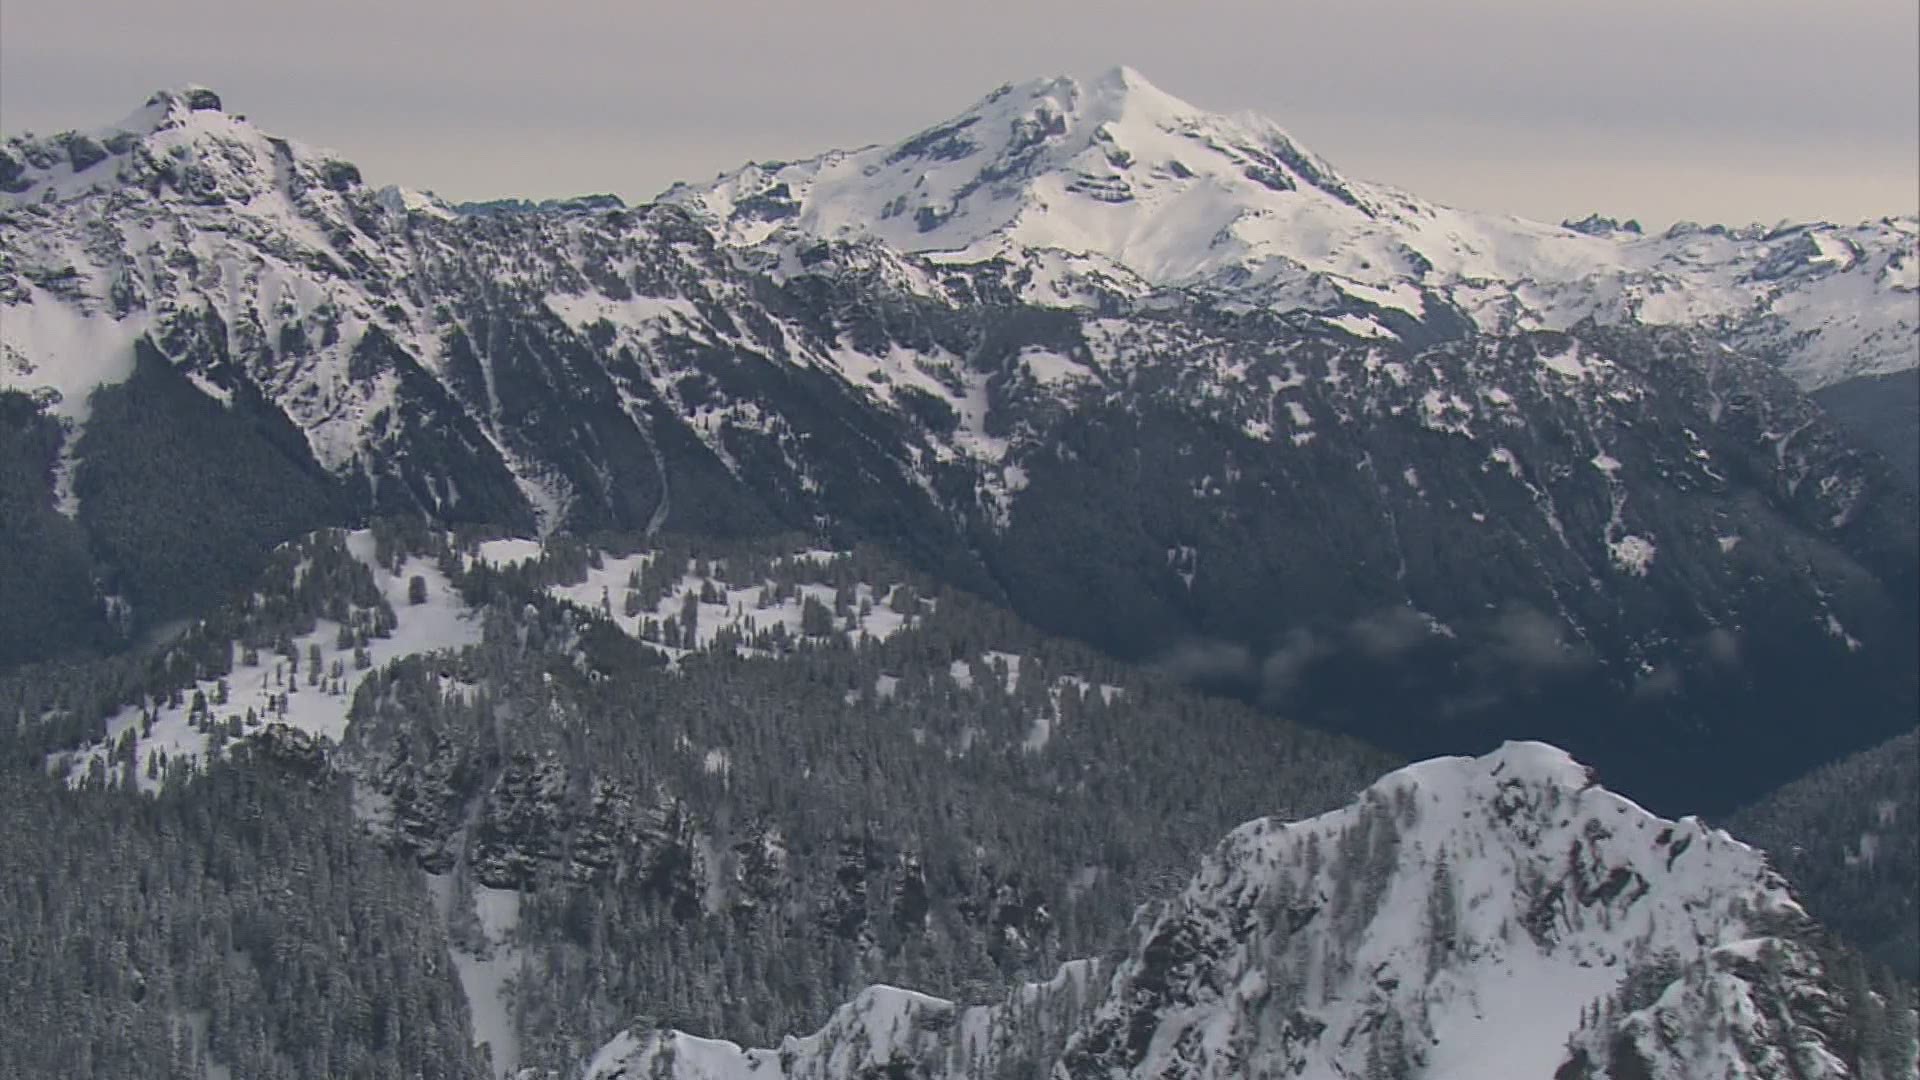 Glacier Peak is the second most active explosive volcano in the Cascades, according to scientists.